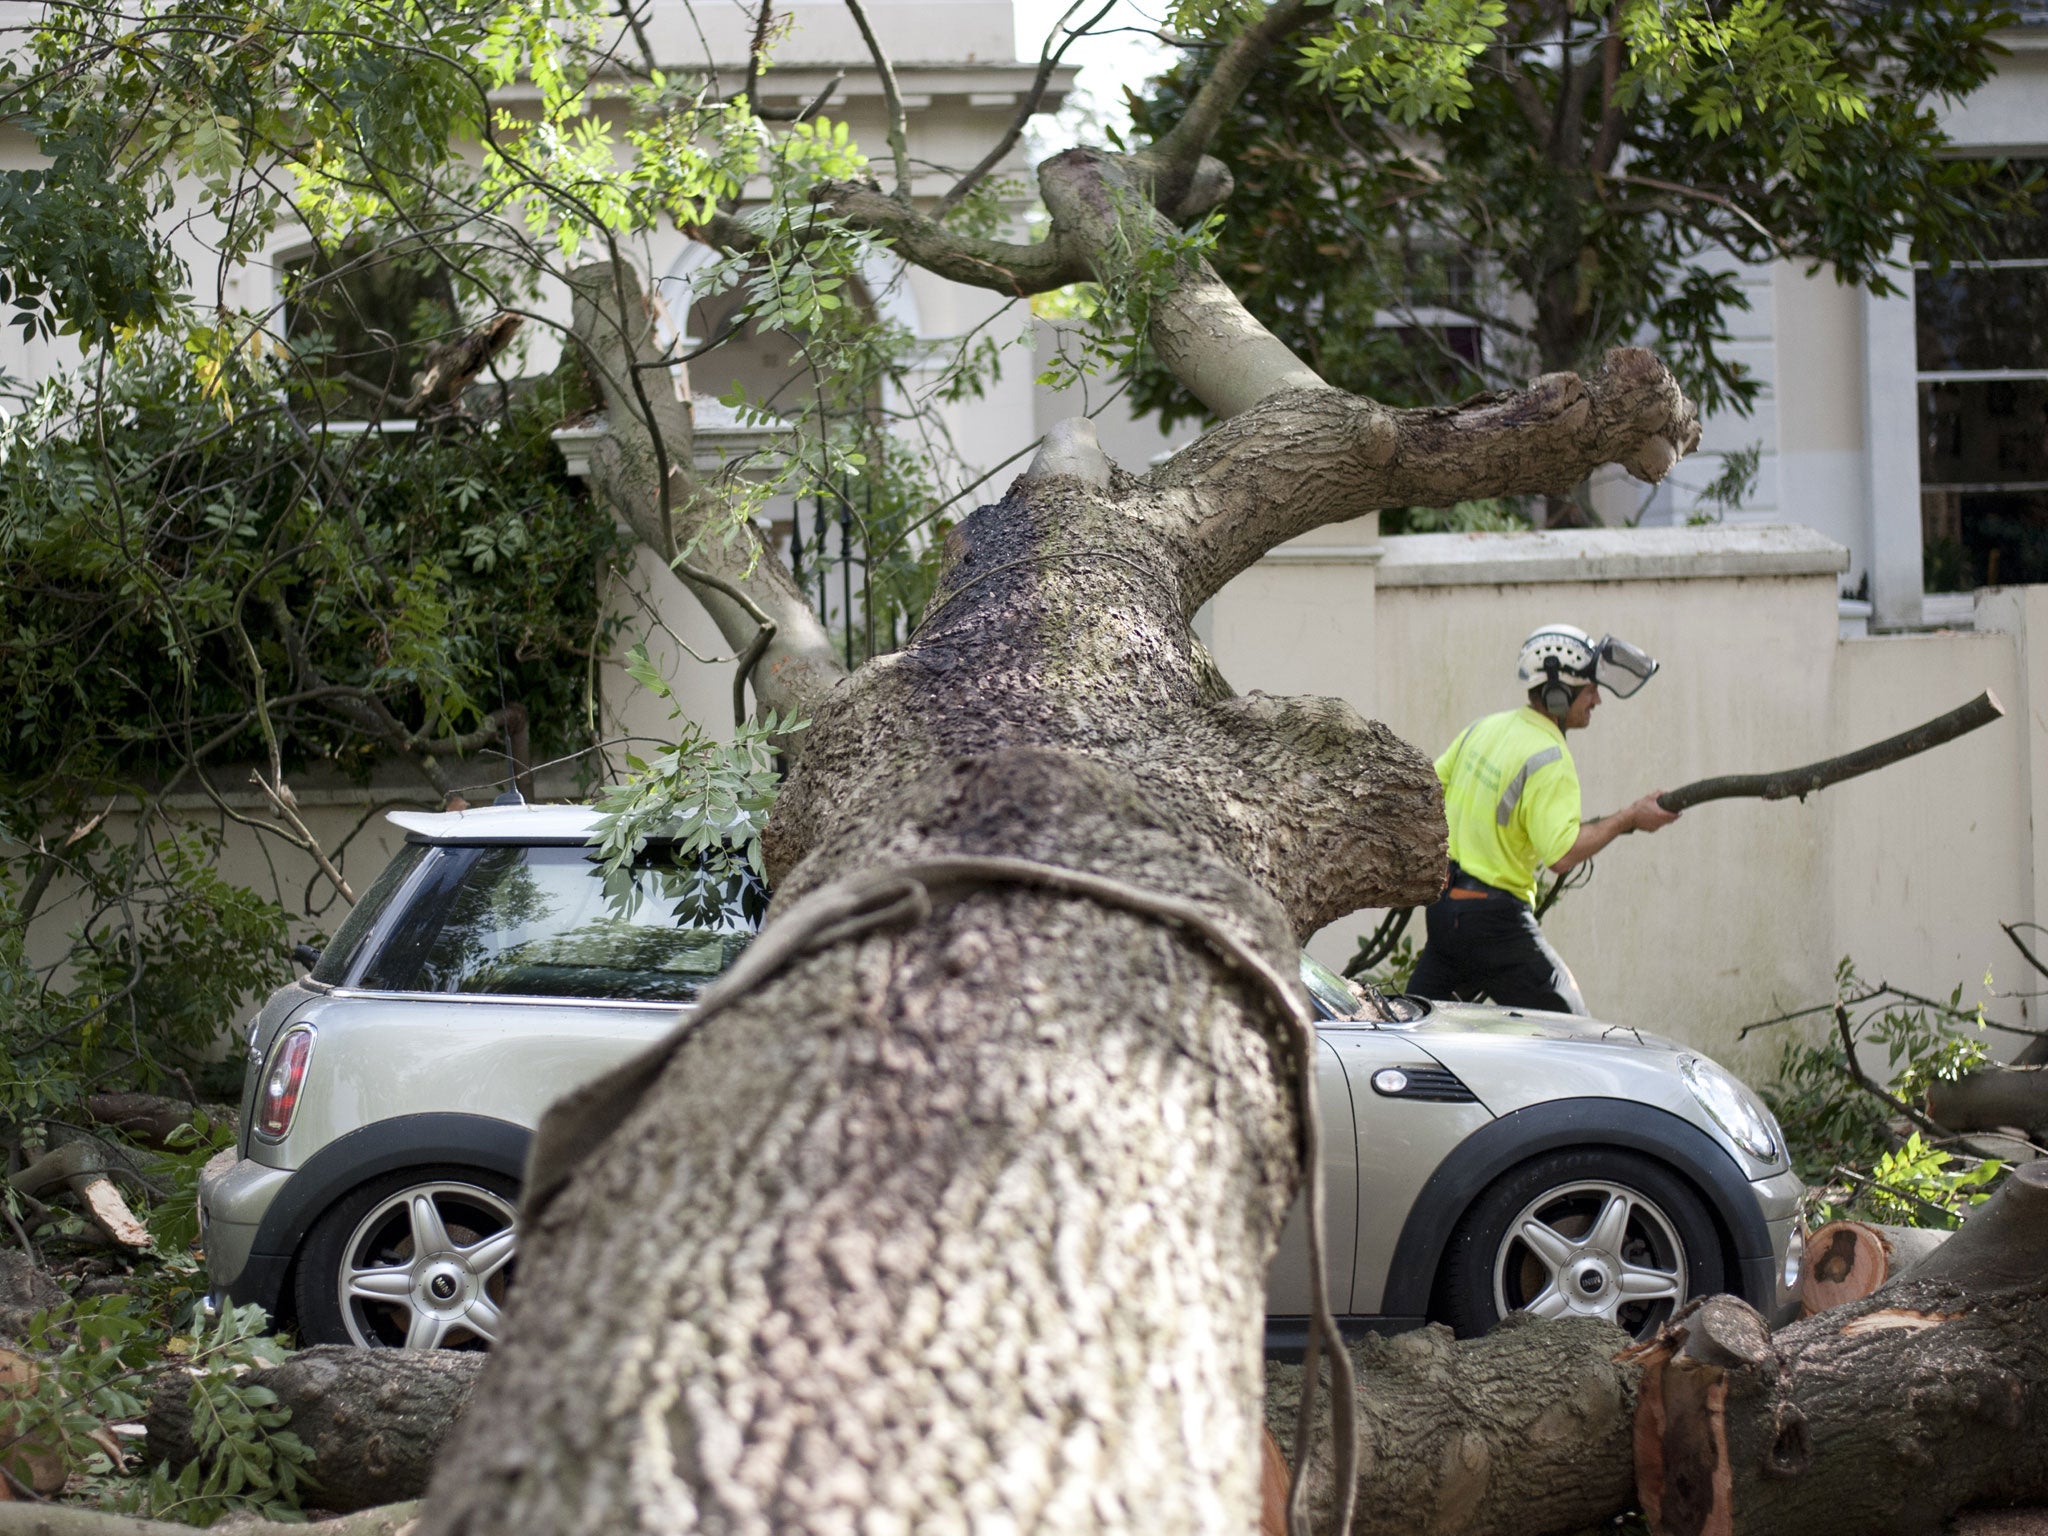 A contractor works on clearing the debris after a tree fell on car during the storm